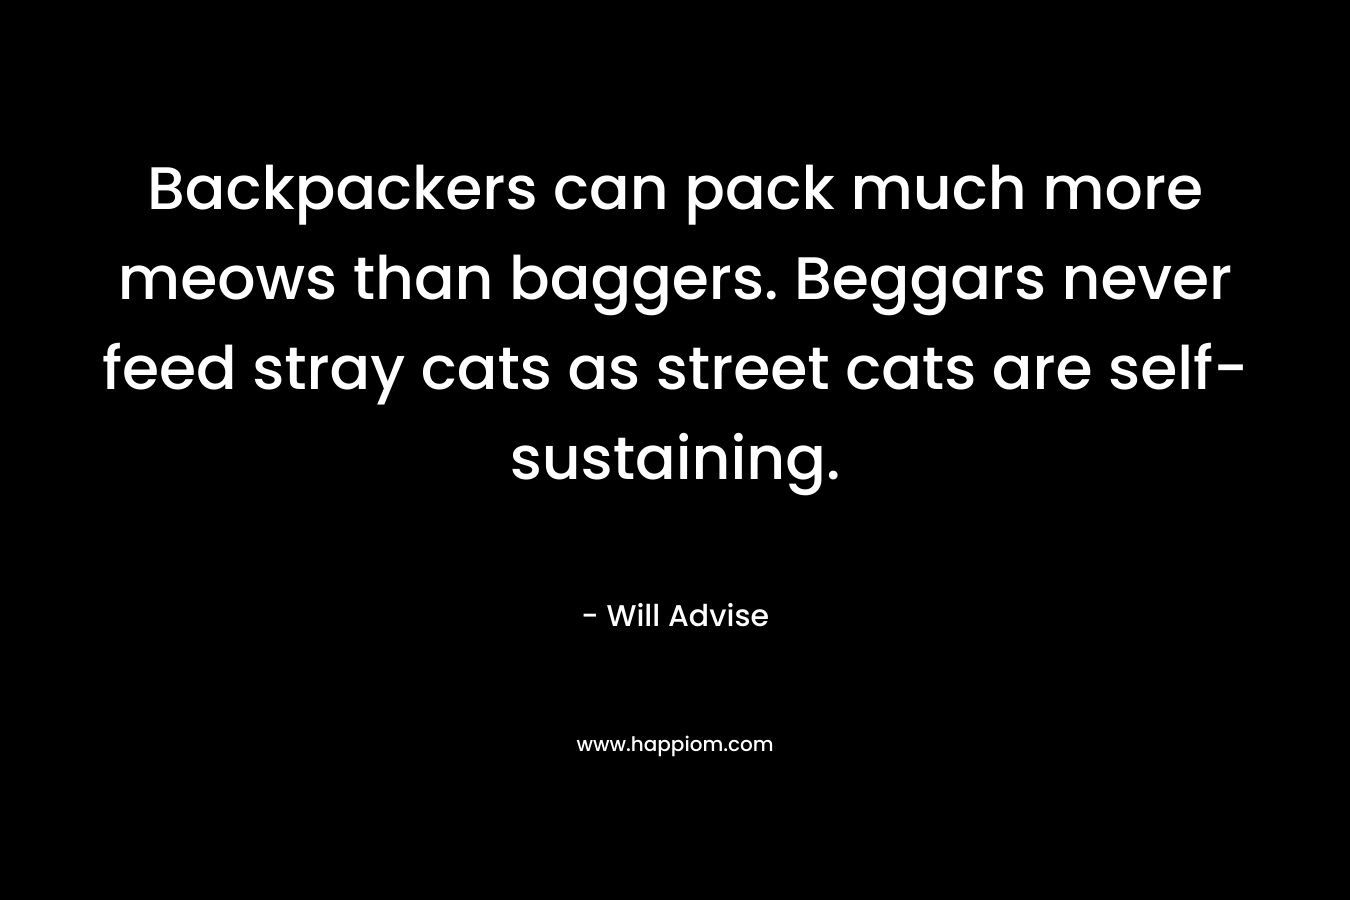 Backpackers can pack much more meows than baggers. Beggars never feed stray cats as street cats are self-sustaining. – Will Advise